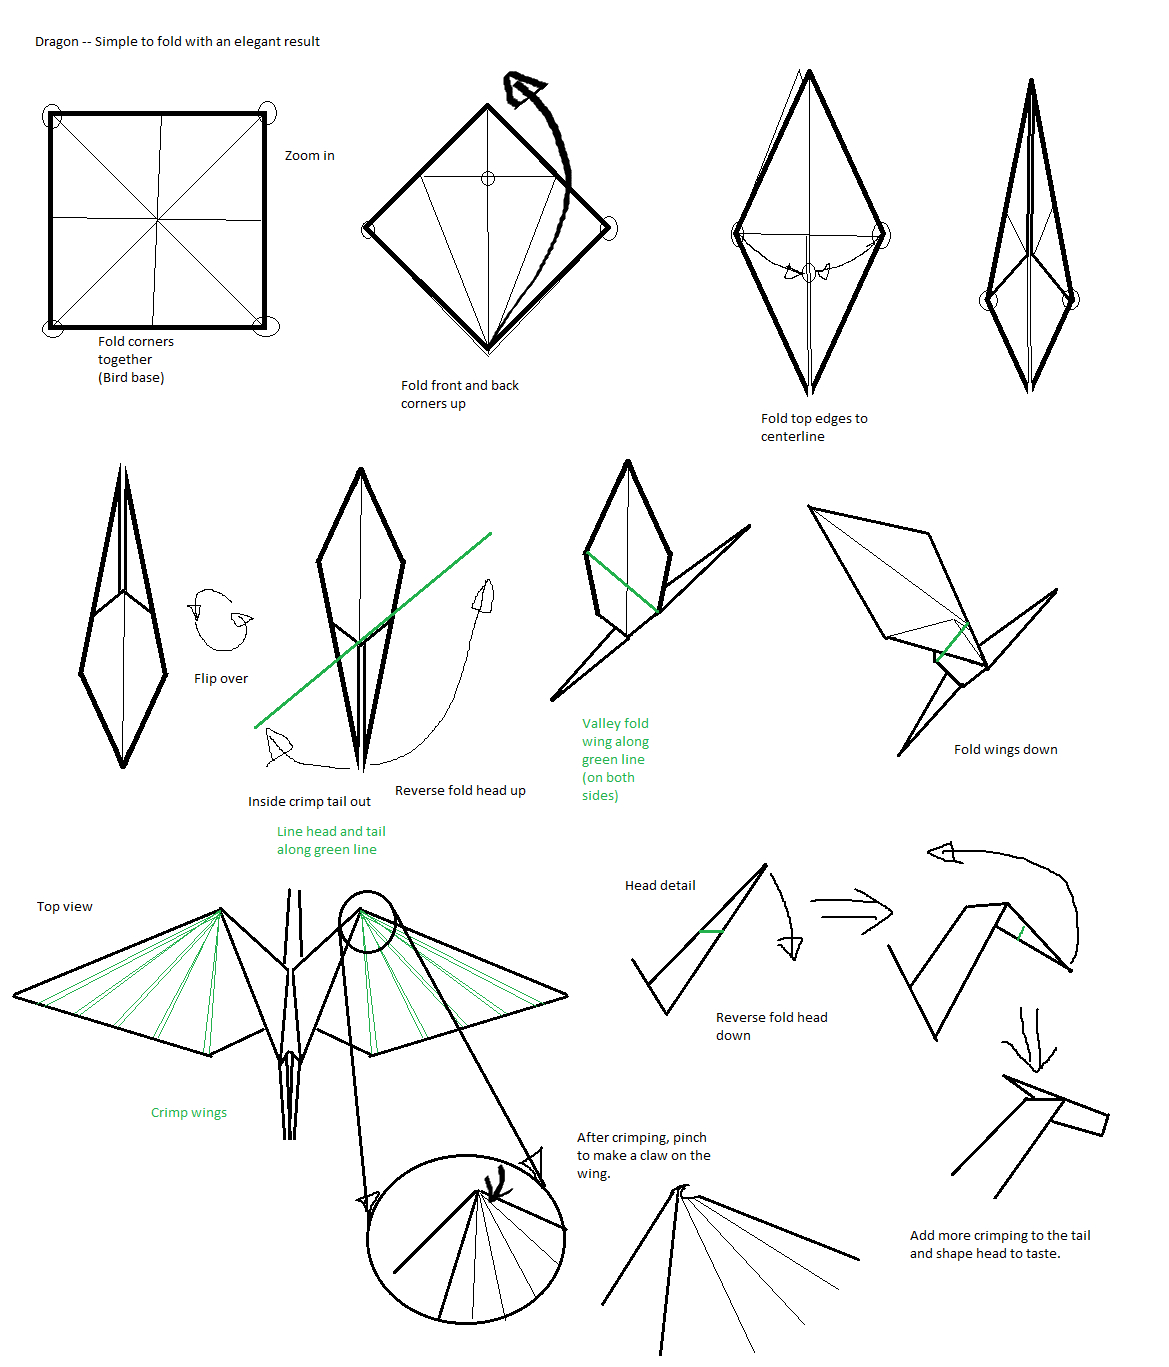 How To Do An Origami Dragon Heres A Quick And Easy Dragon Design I Didnt See Diagrams For It